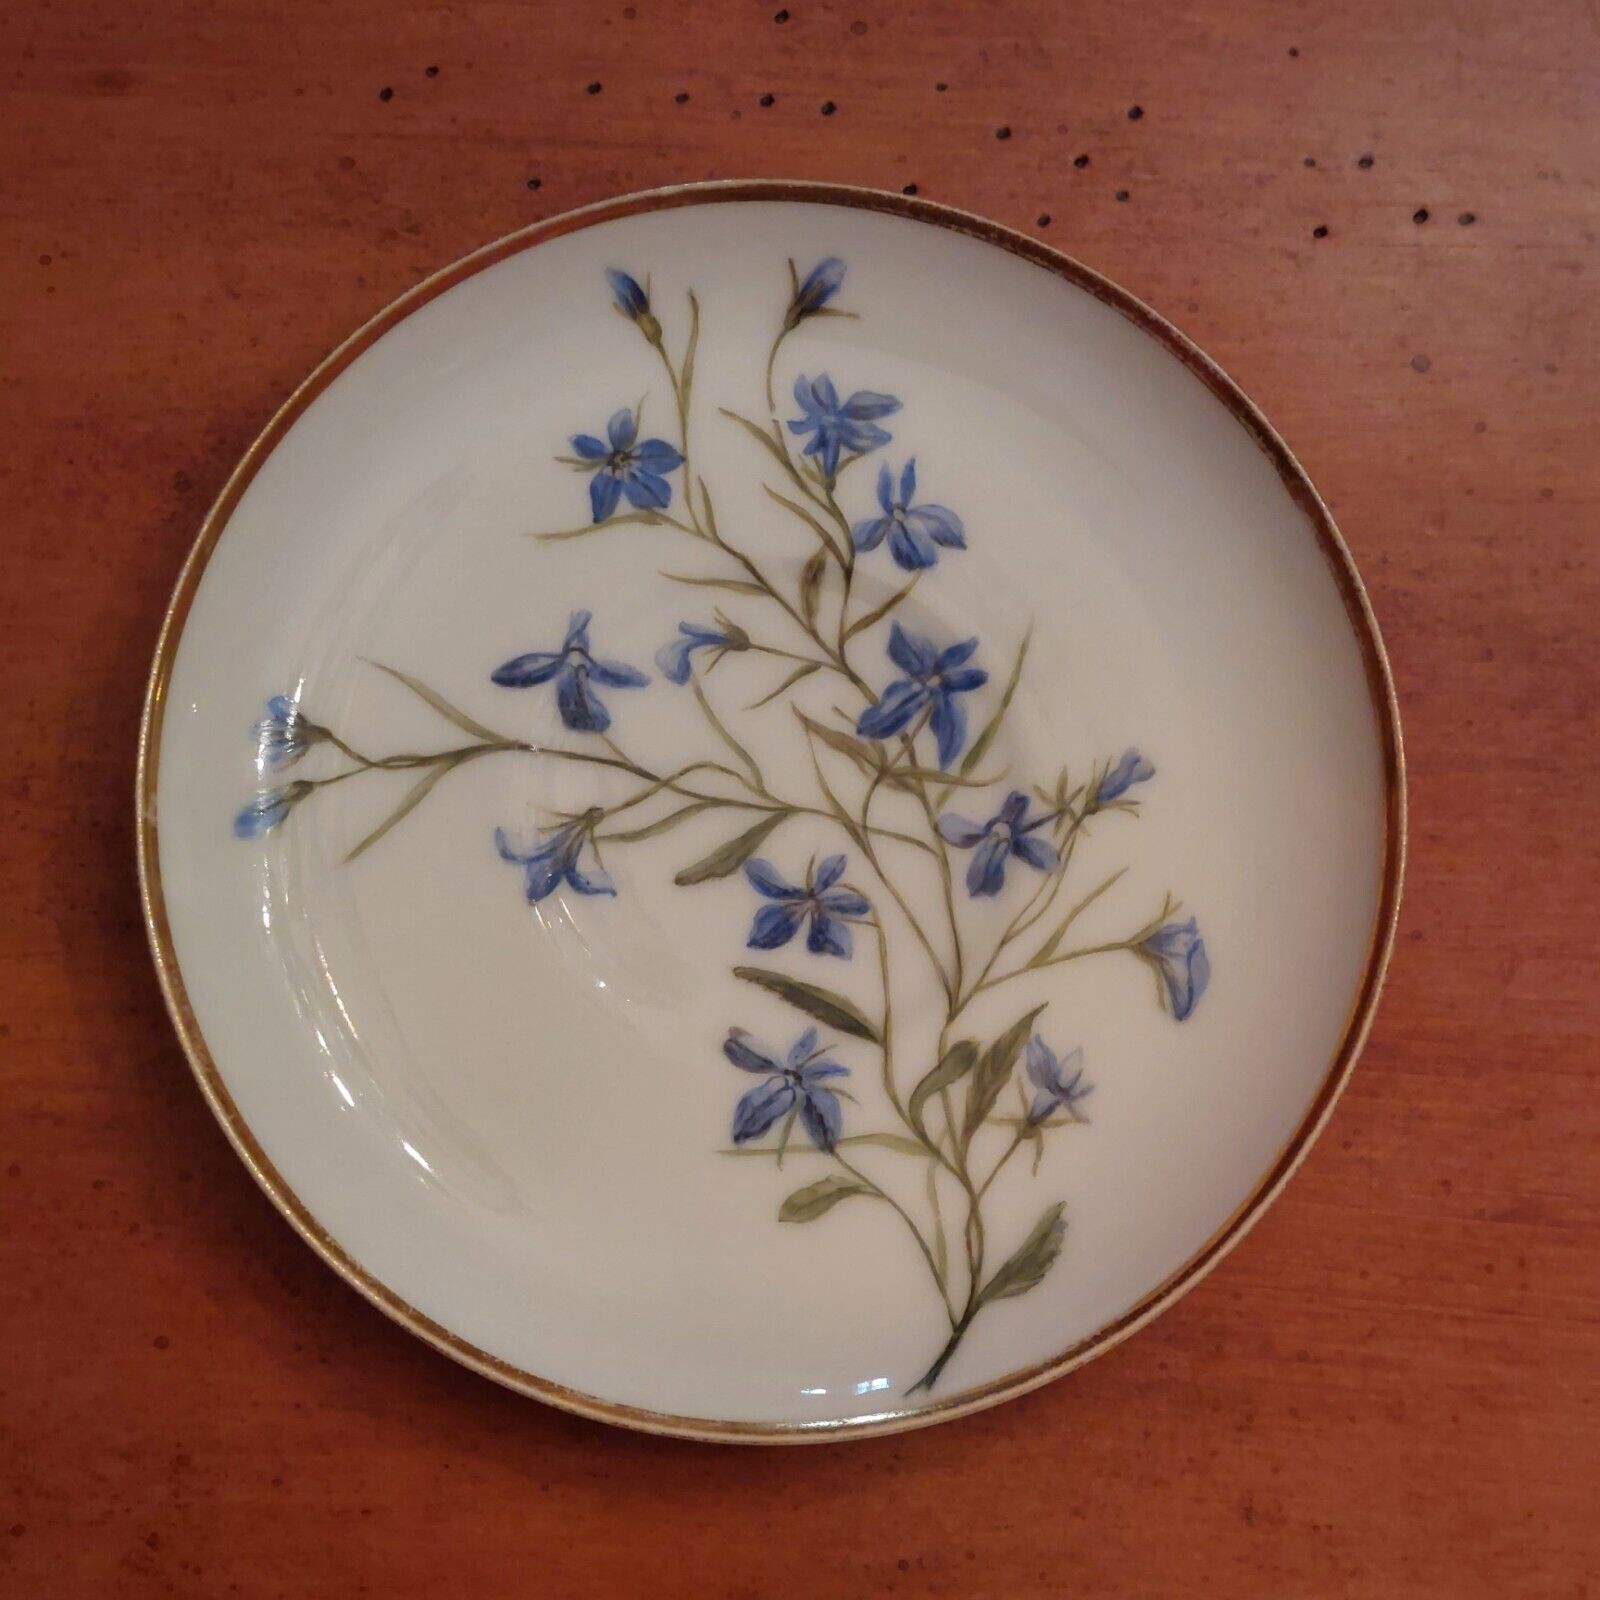 RARE Antique 1886 CFH/GDM Floral Saucer, Hand Painted and Signed